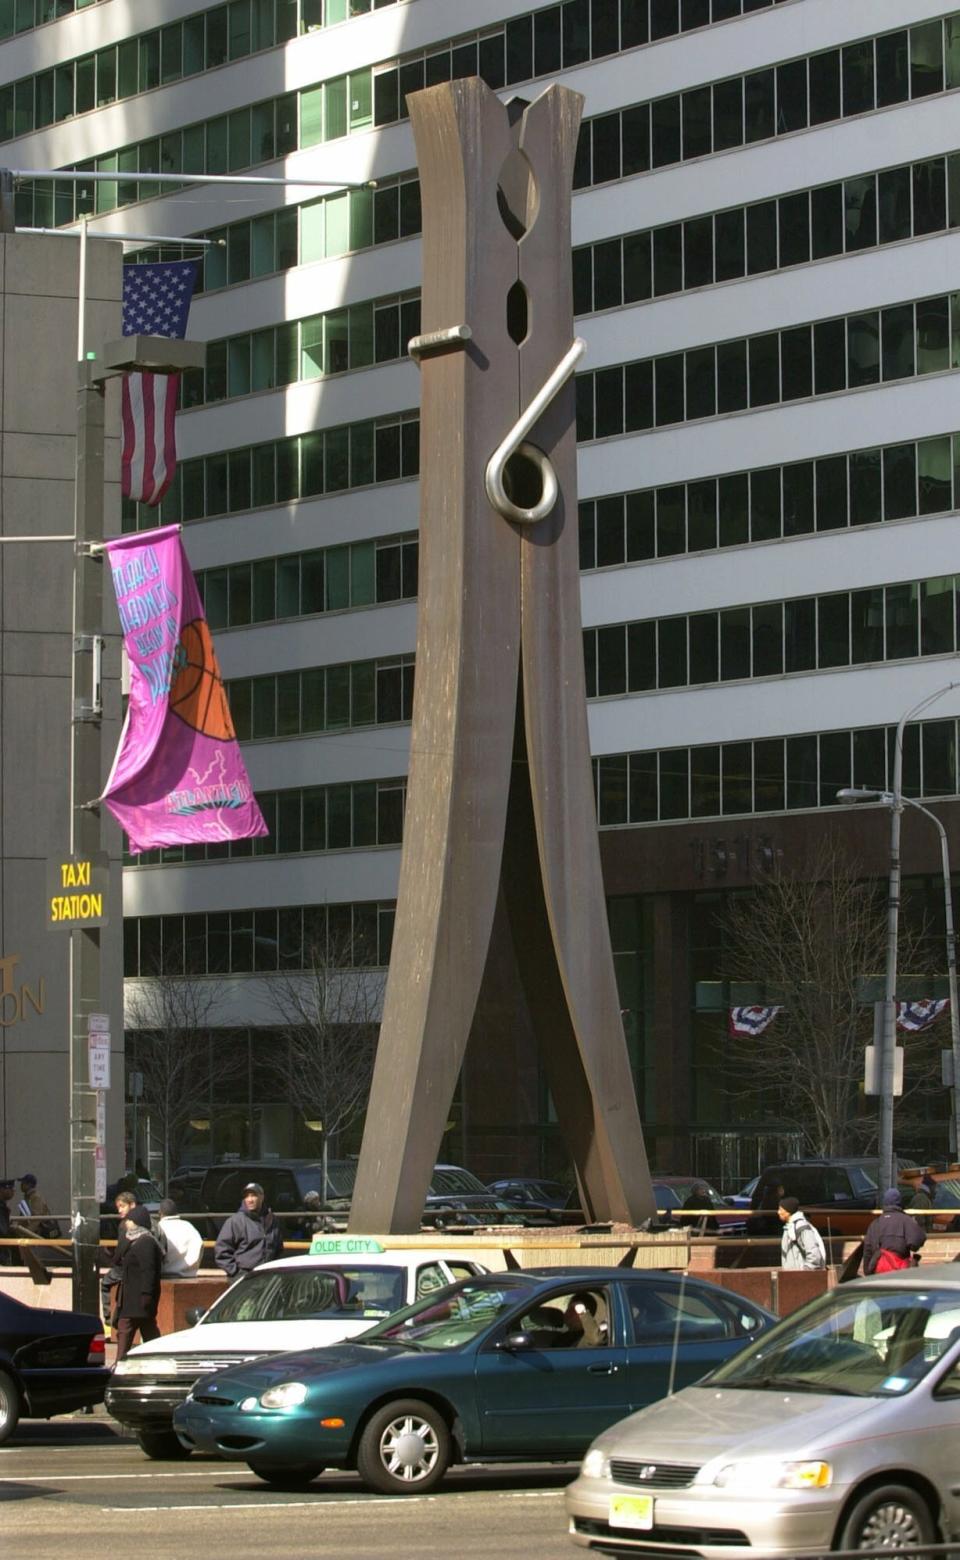 FILE - Pop artist Claes Oldenburg's "Clothespin" sculpture is displayed in the Center City section of Philadelphia on Friday, March 1, 2002. Oldenburg died Monday, July 18, 2022, in Manhattan, according to his daughter, Maartje Oldenburg. He had been in poor health since falling and breaking his hip a month ago. He was 93. (AP Photo/Dan Loh, File)